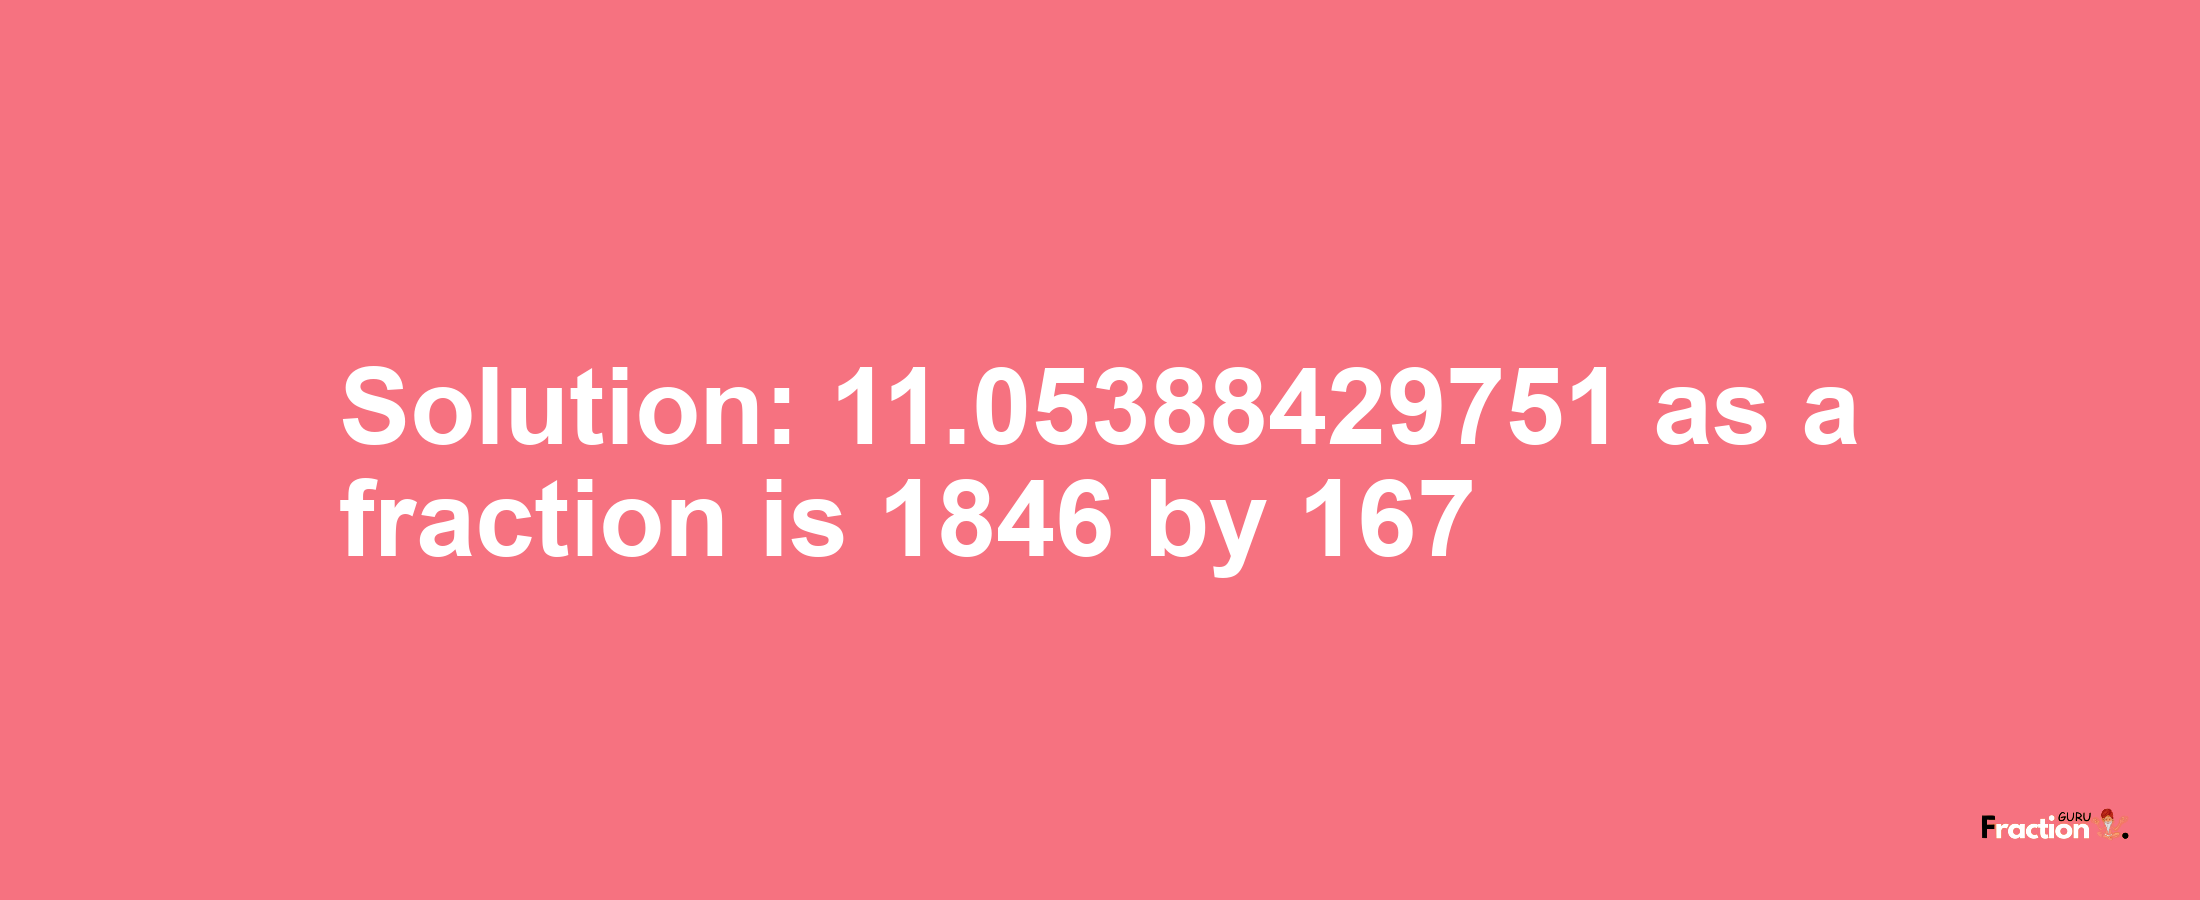 Solution:11.05388429751 as a fraction is 1846/167